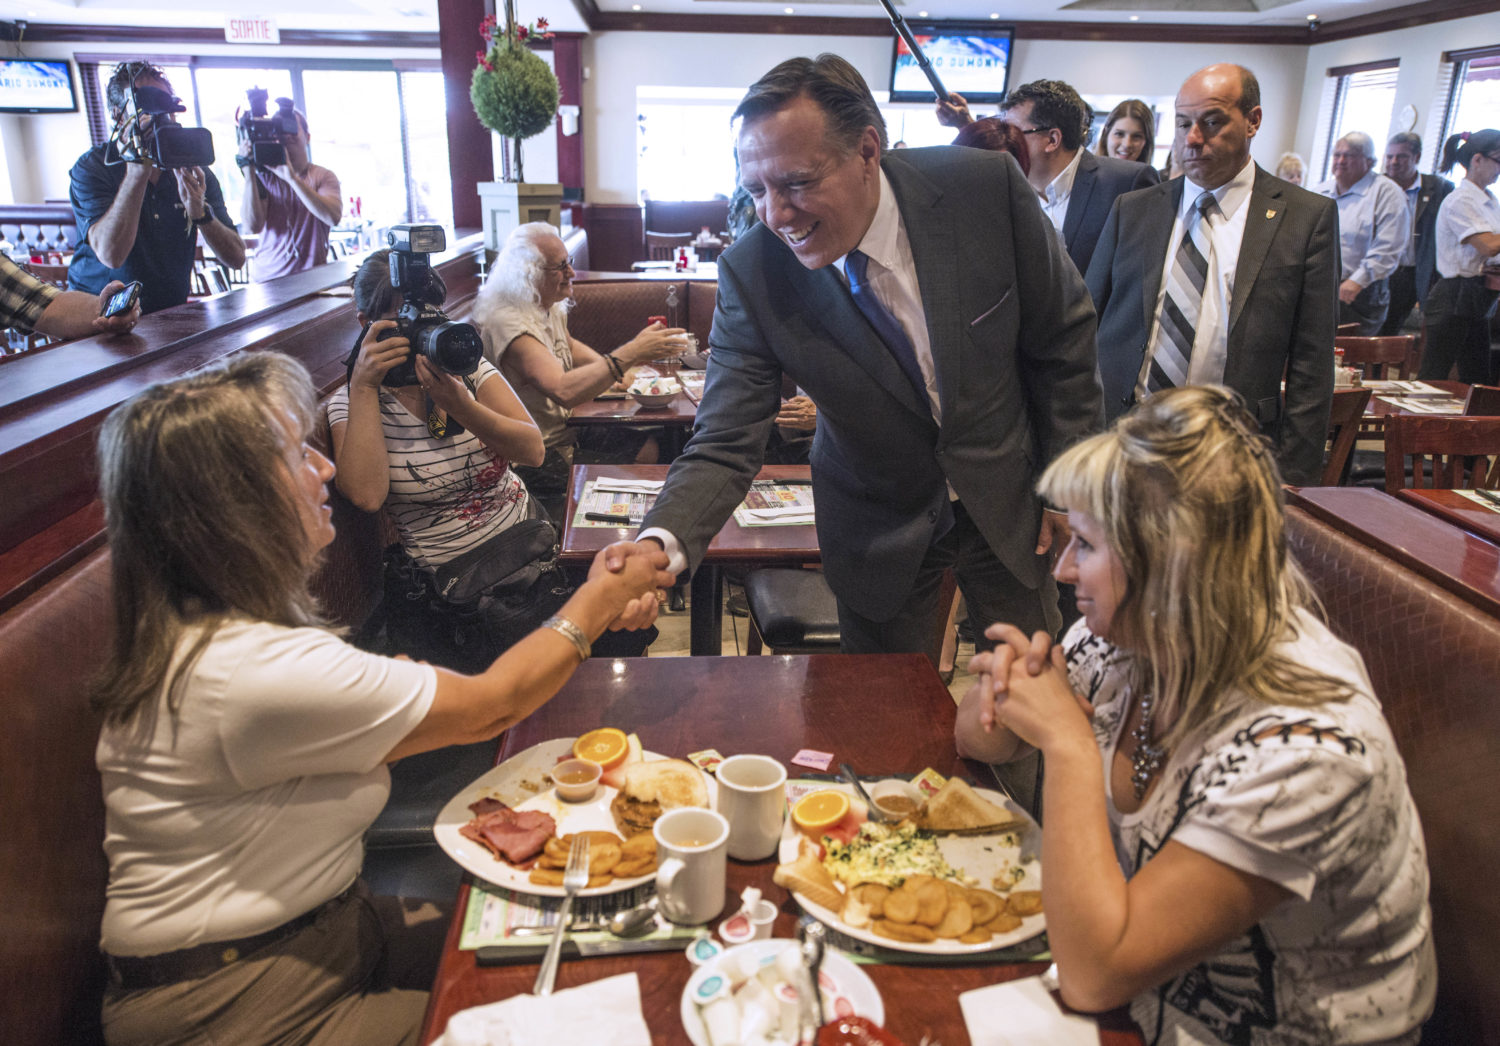 Coalition Avenir Quebec (CAQ) candidate Francois Legault greets diners during lunch with staffers after voting on September 4, 2012 in l'Assomption, Quebec, Canada.(ROGERIO BARBOSA/AFP/GettyImages)